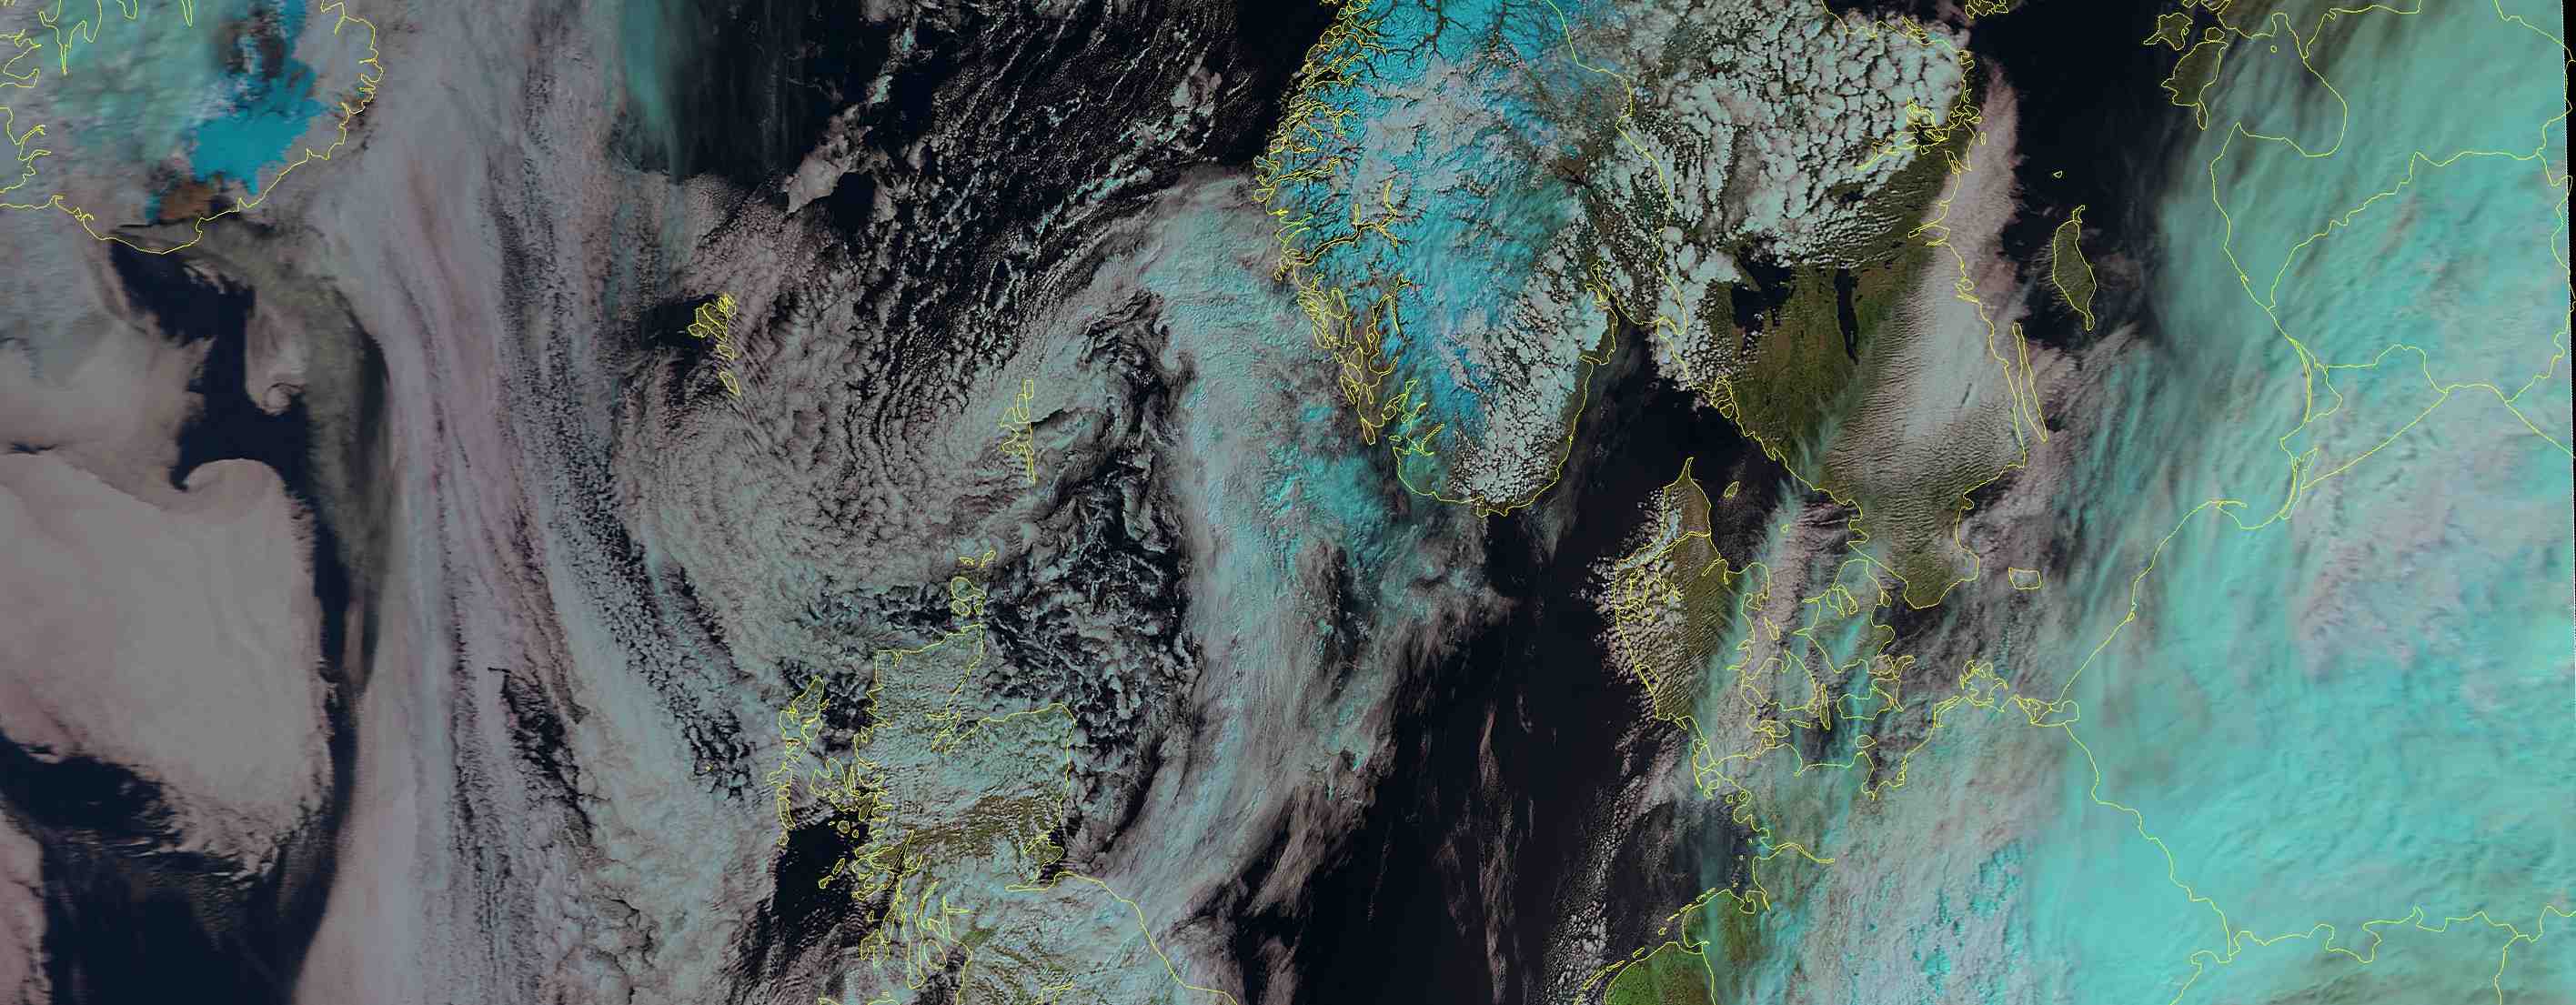 Image captured by AVHRR instrument on EUMETSAT's Metop-A polar-orbiting satellite shows the extent of the volcanic ash cloud coming from the volcano. Image was captured at 10:13 UTC 6 May 2010